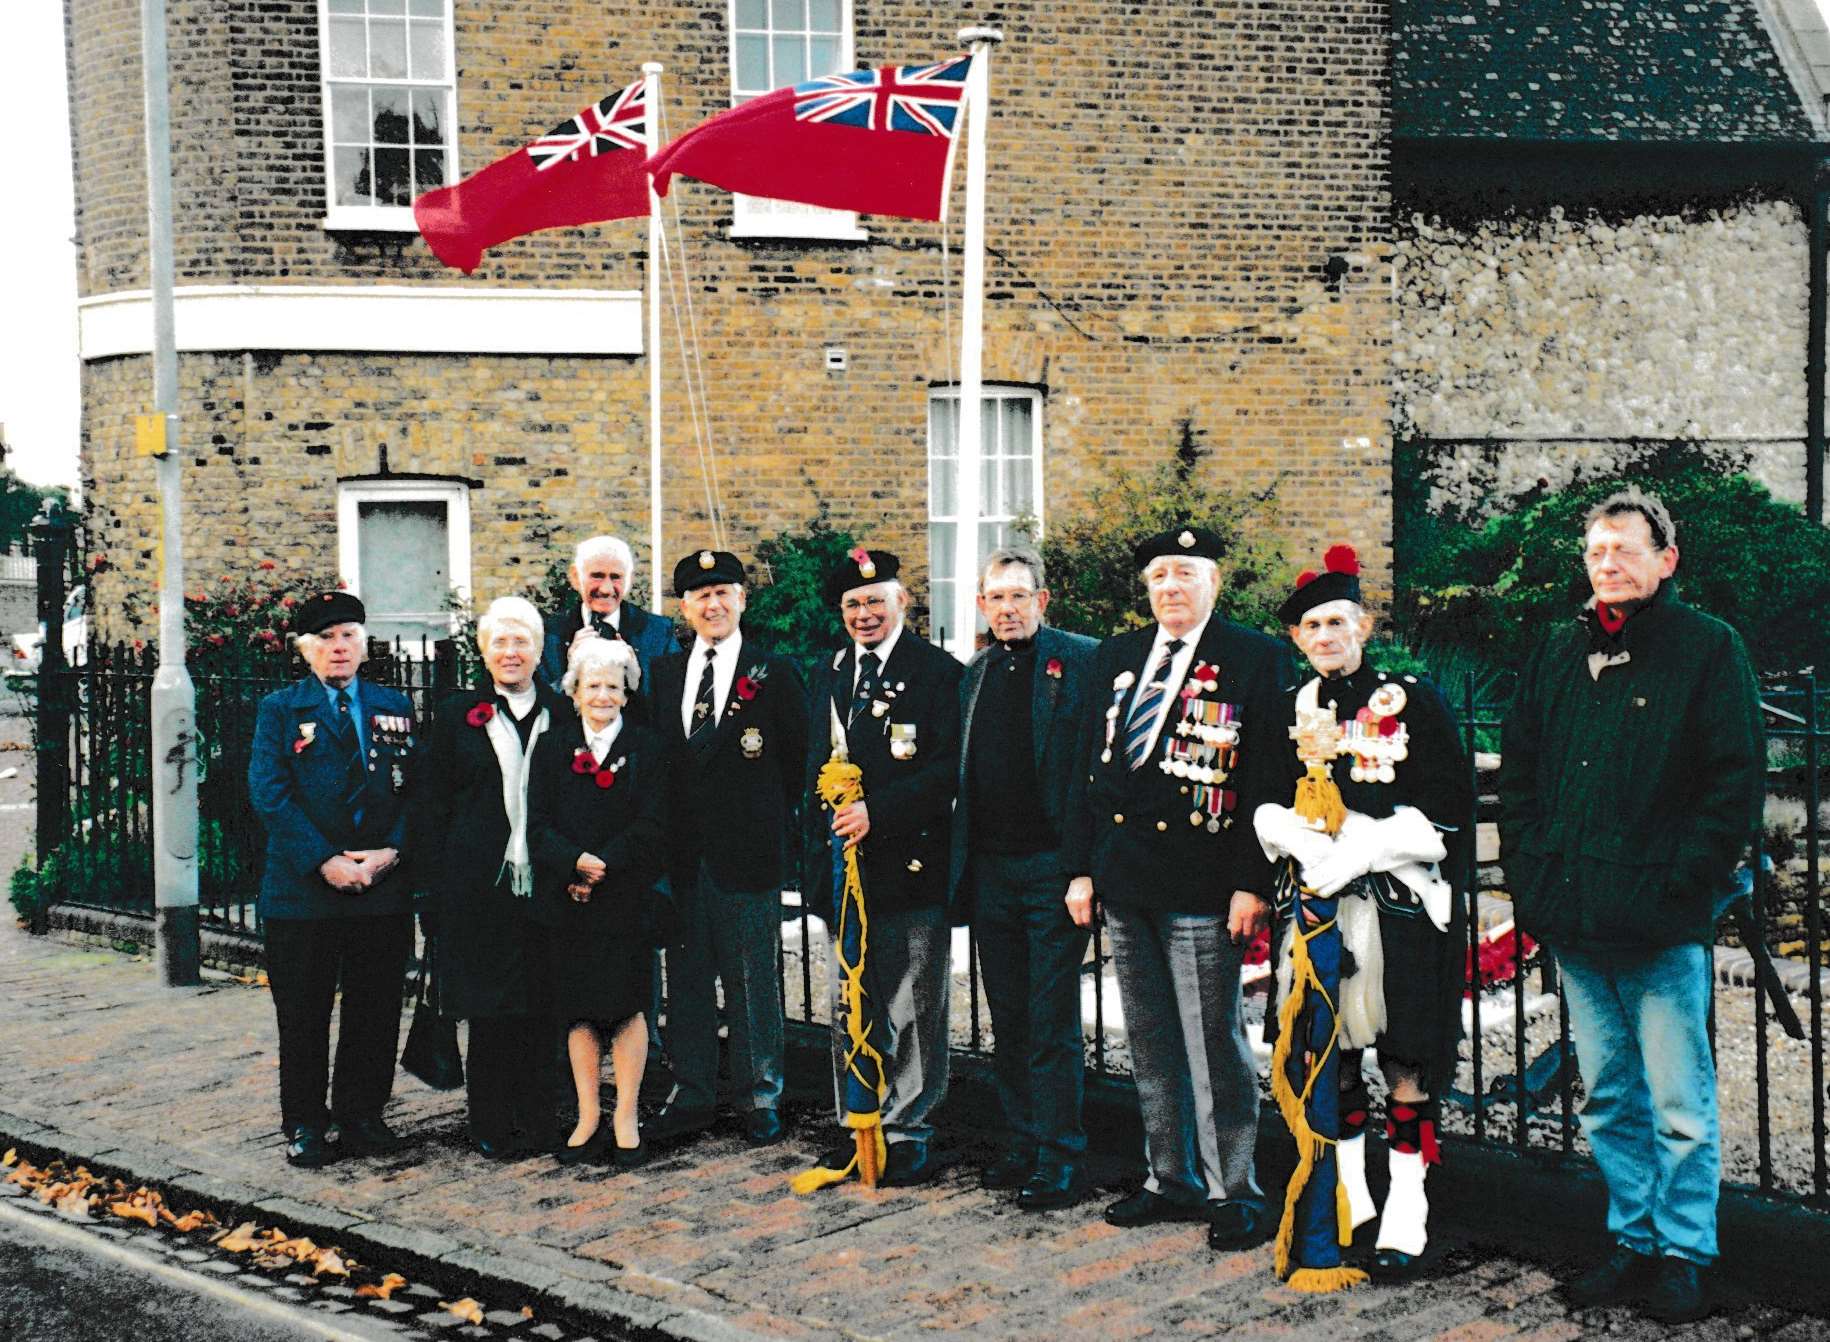 The first Merchant Navy Remembrance service photo from 2005 shows a much smaller attendance than this year. Pictured L-R: Stan Mayes, Rita Stanford, Daisy Jeal, Dave Gabbitas, John Stanford, Albert Harwood, Tony Larkin, John Roberts, Harold Jeal, Jeff Aitchinson